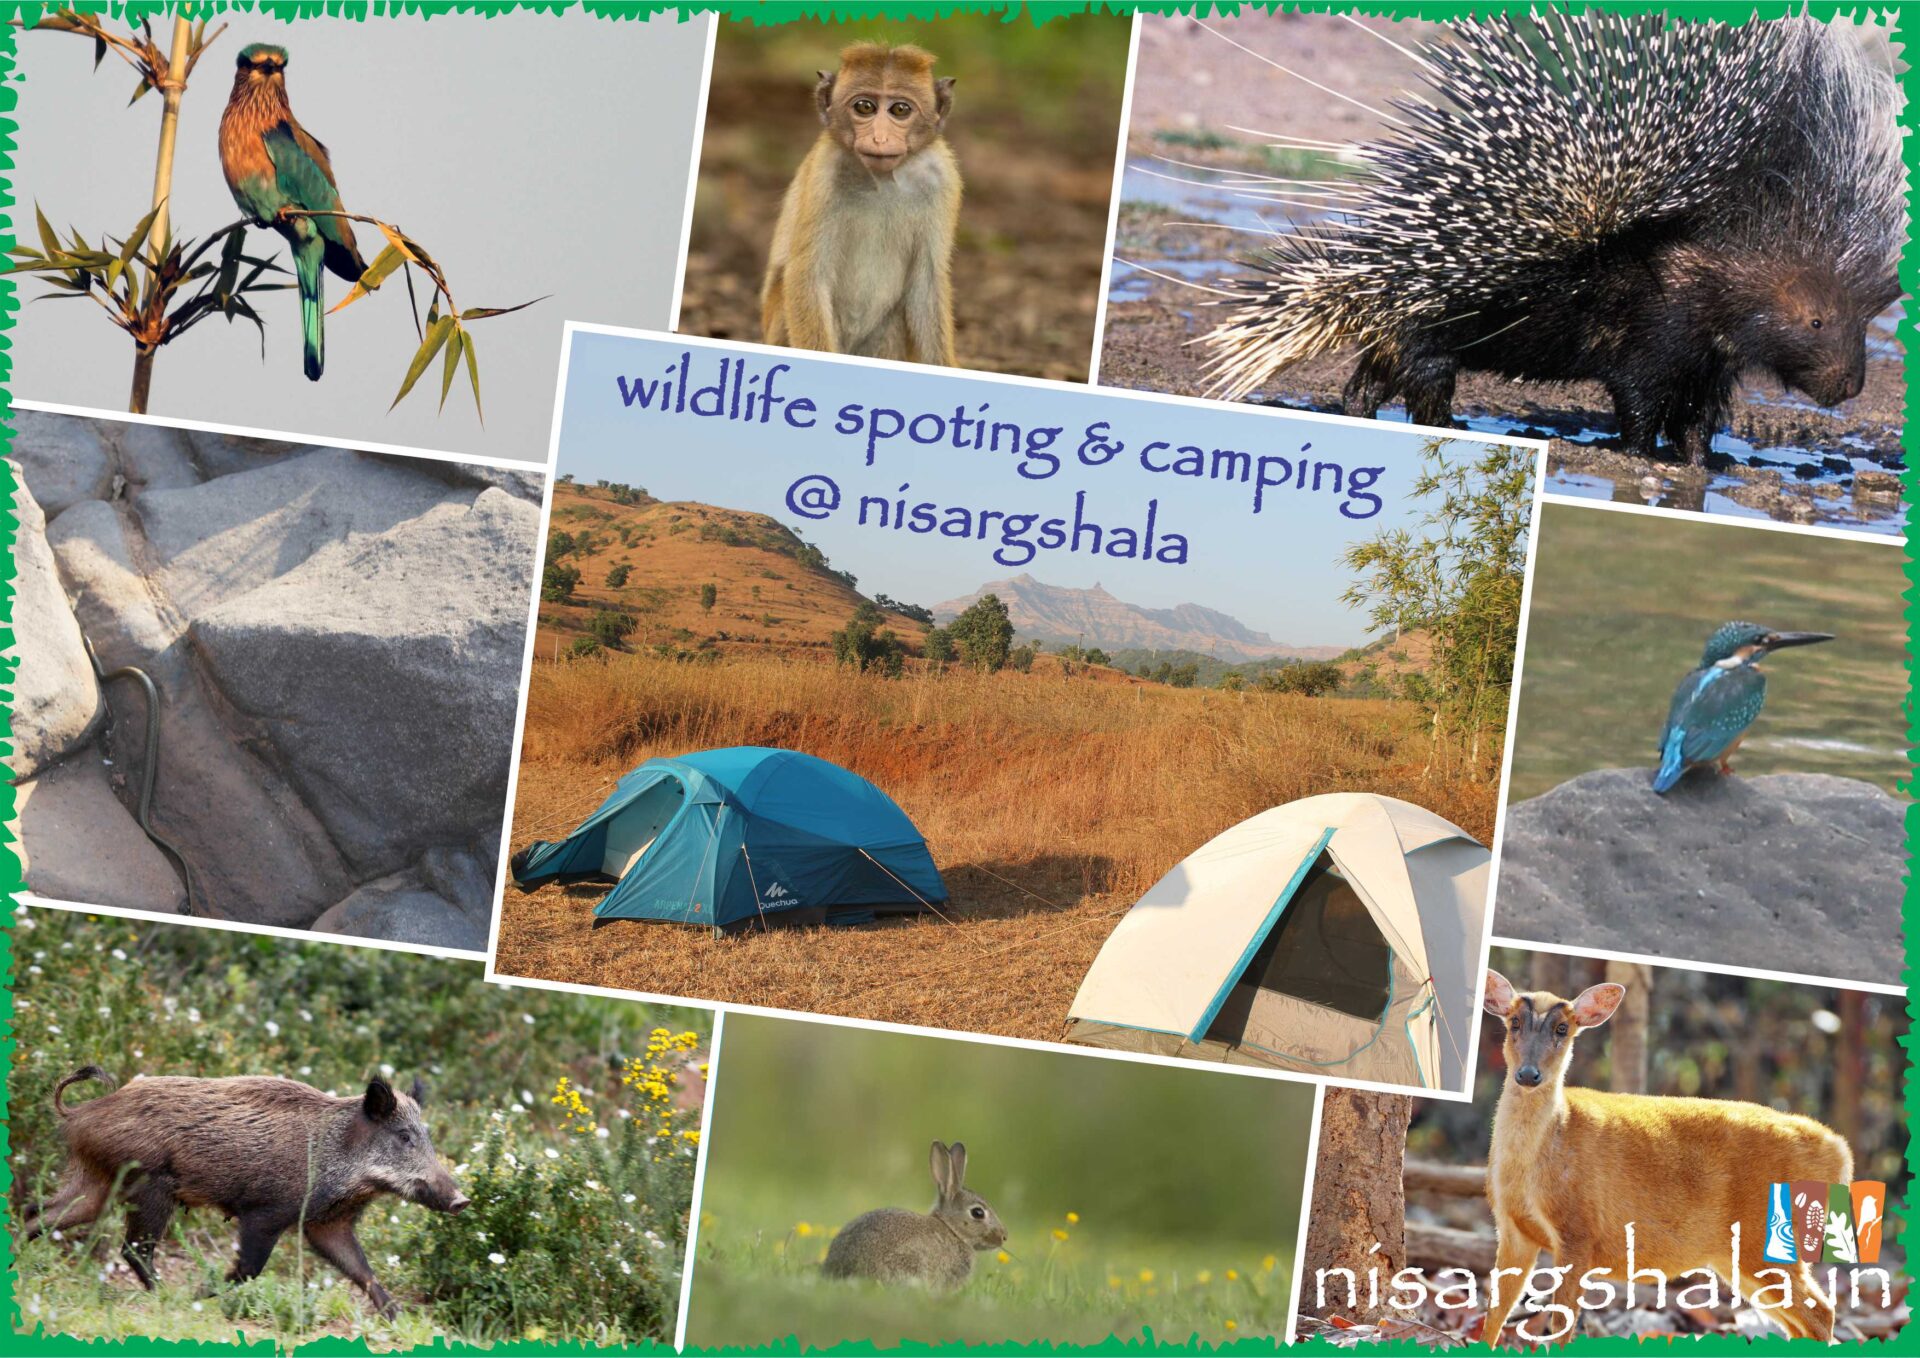 Wildlife spotting and camping near Pune